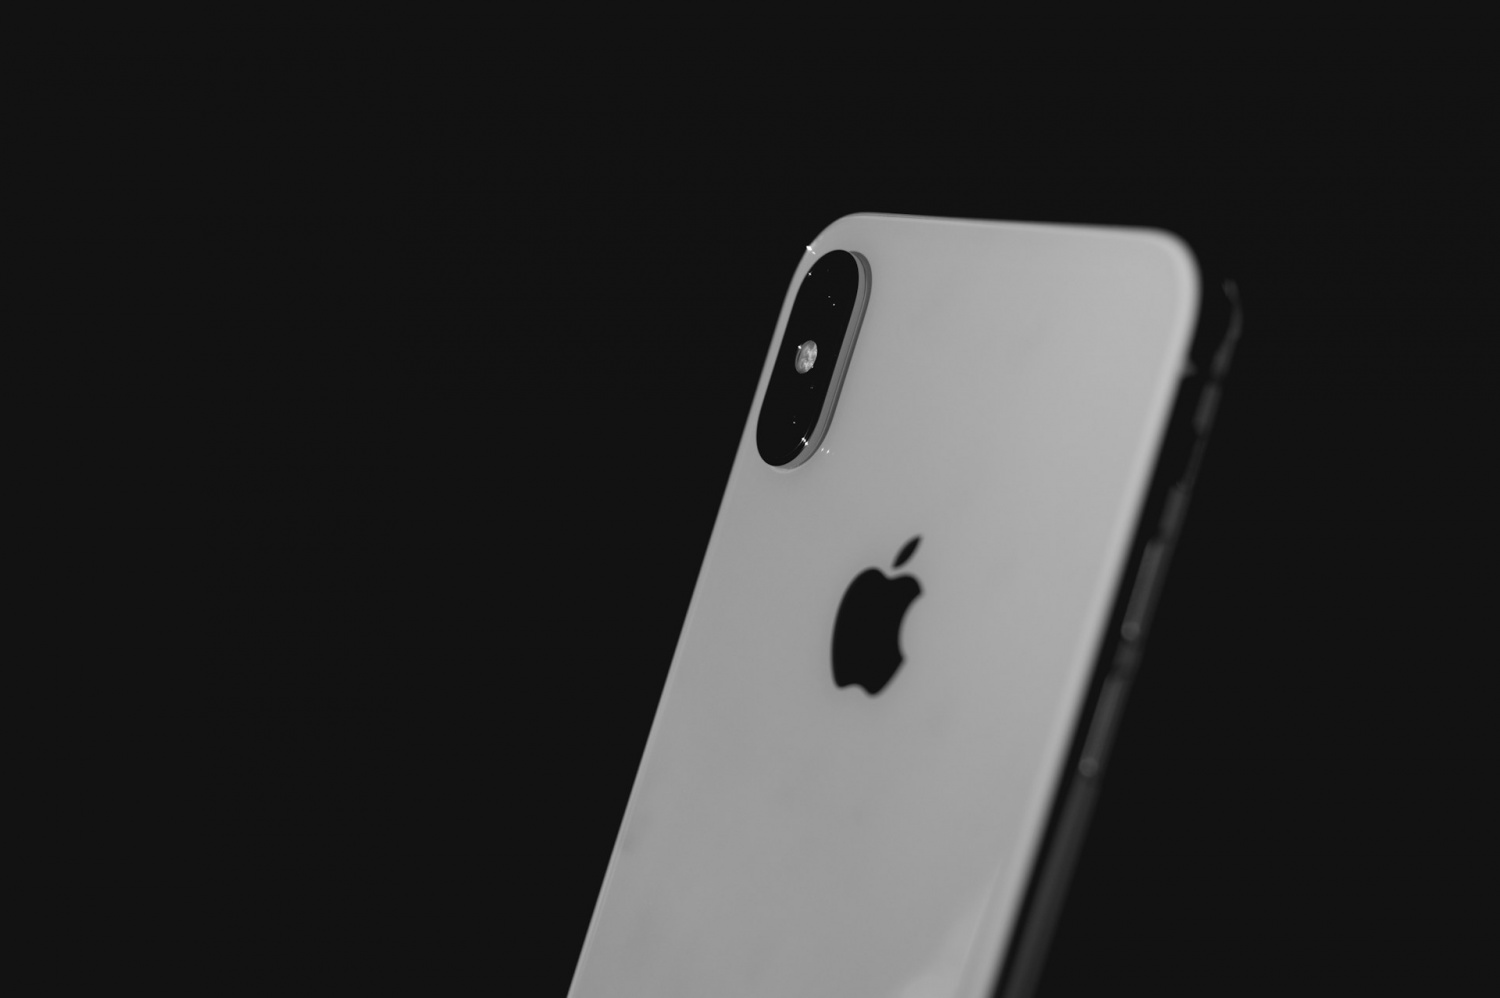 Apple iphone Activations Slowly however absolutely on the Decline, Prompting Finish customers to Wait round Extra time to Enhance: Report : Tech : Tech Durations